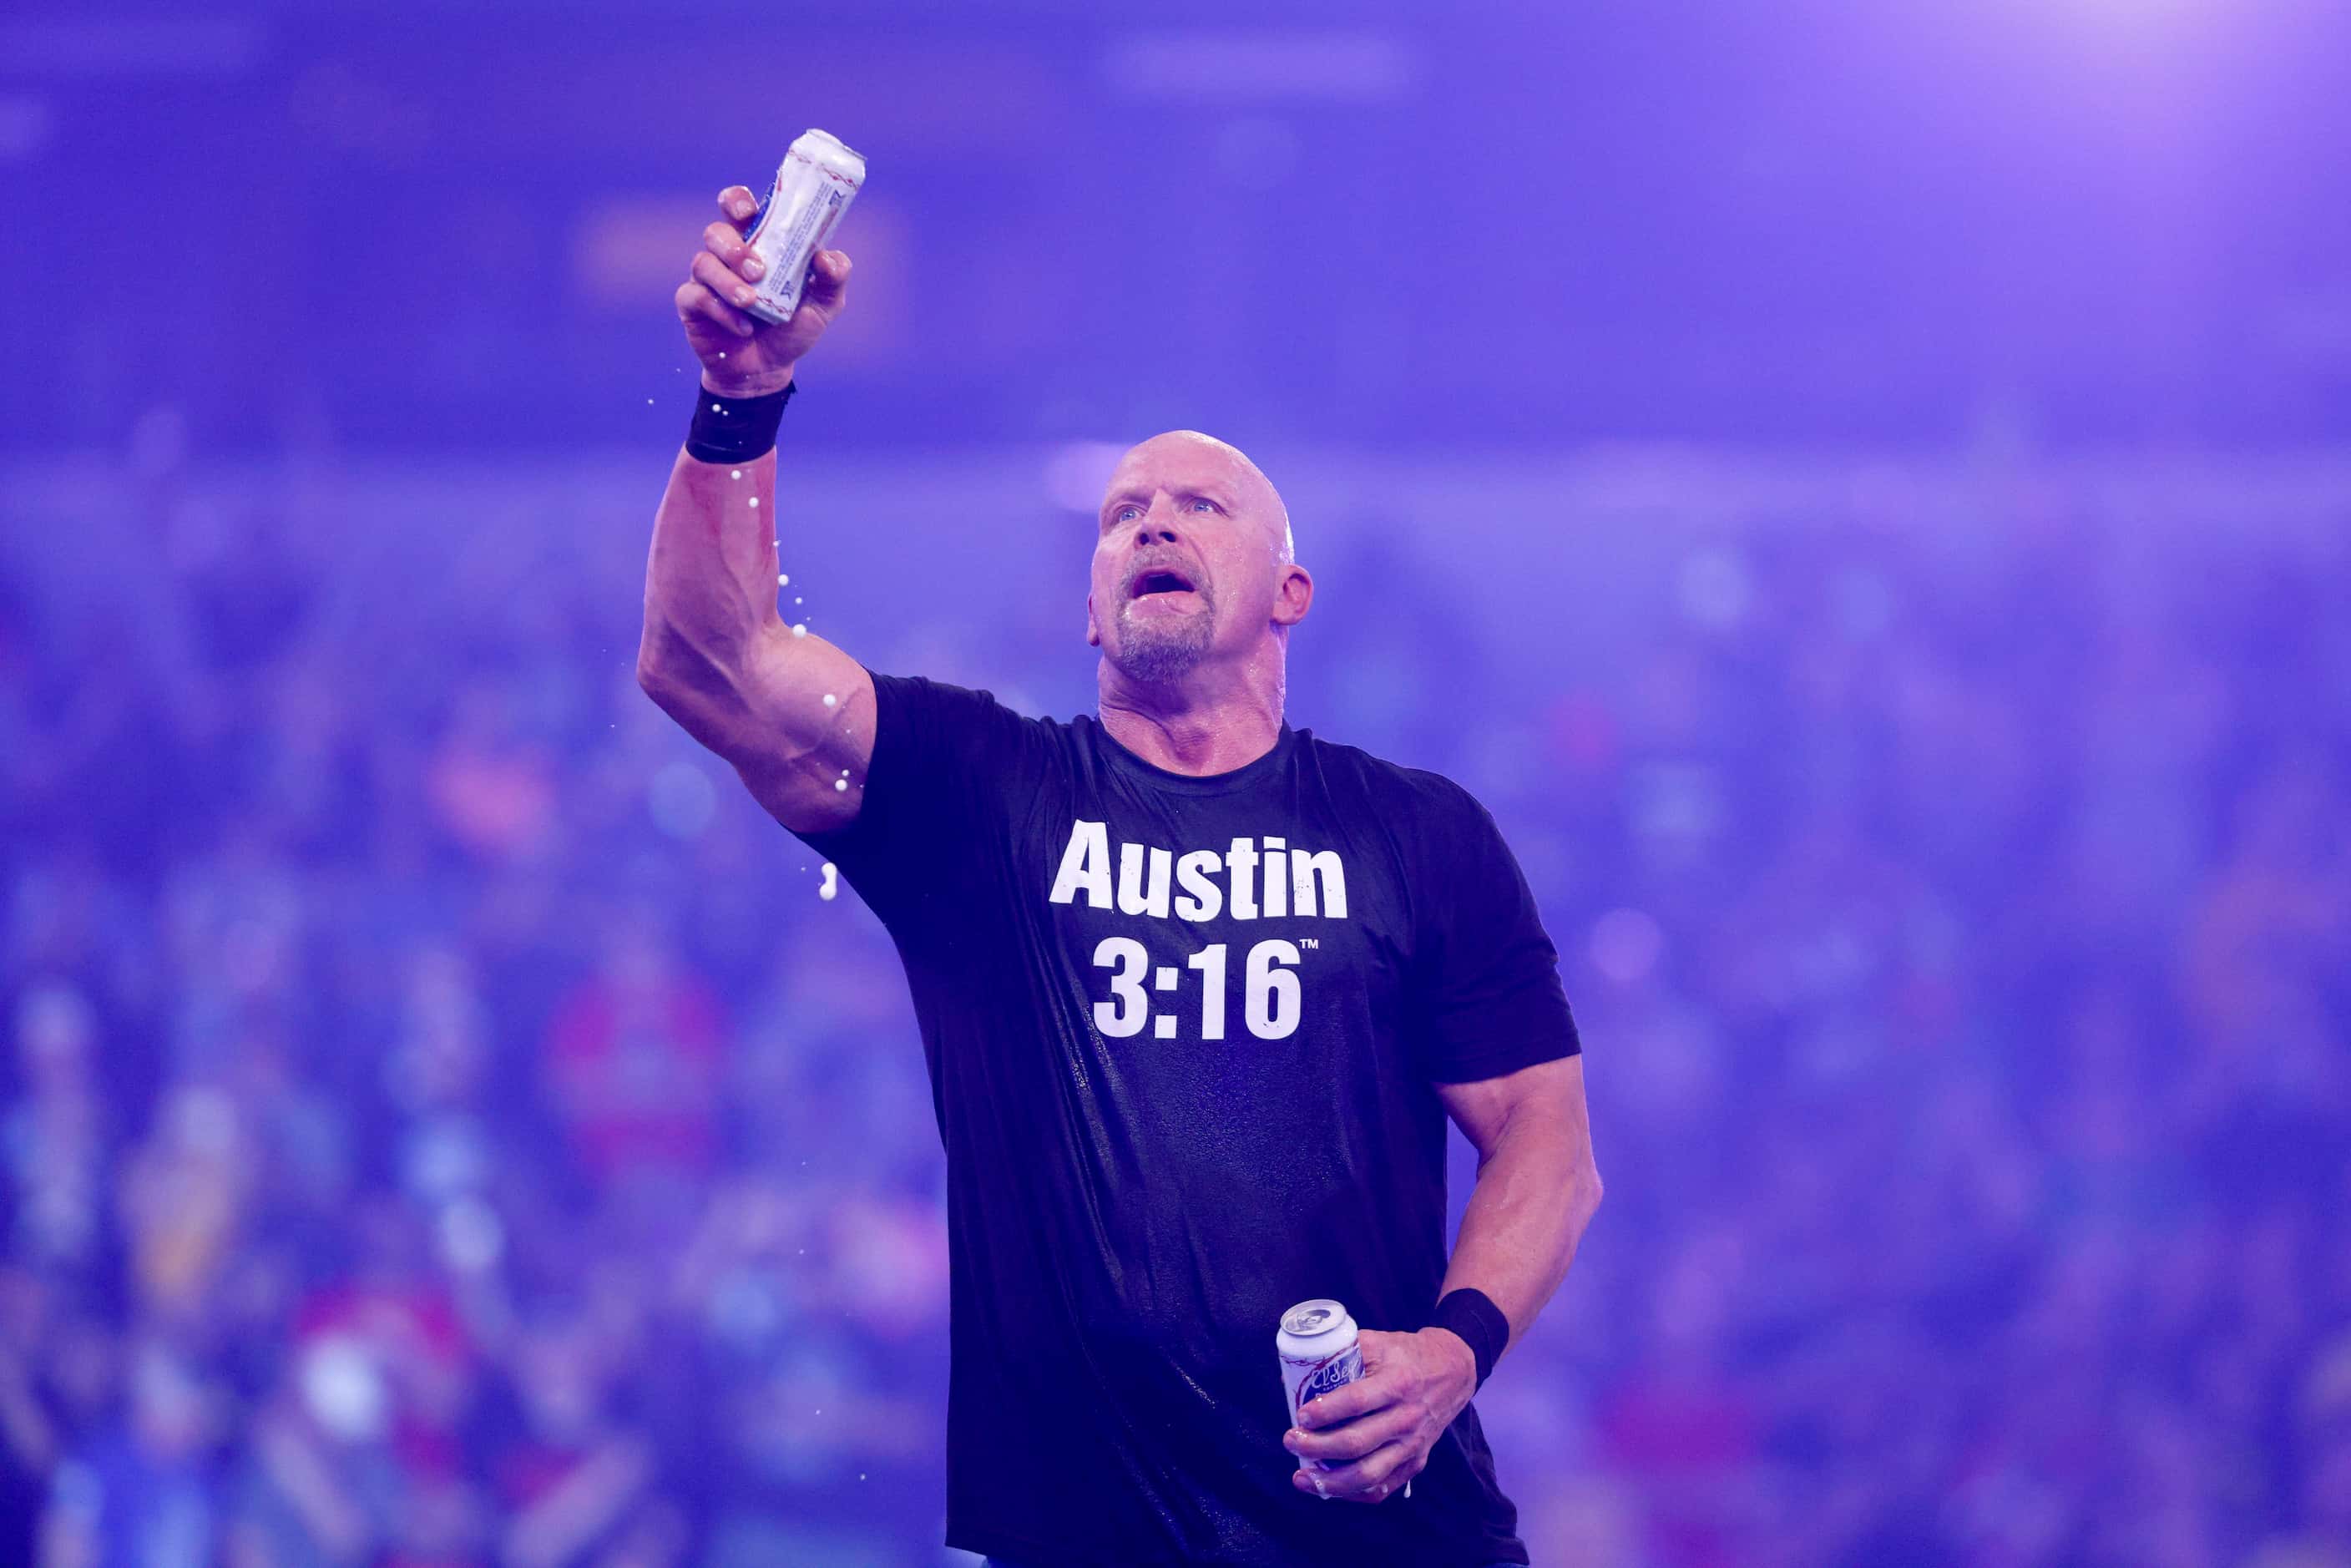 “Stone Cold” Steve Austin raises a beer after defeating Kevin Owens in a match at...